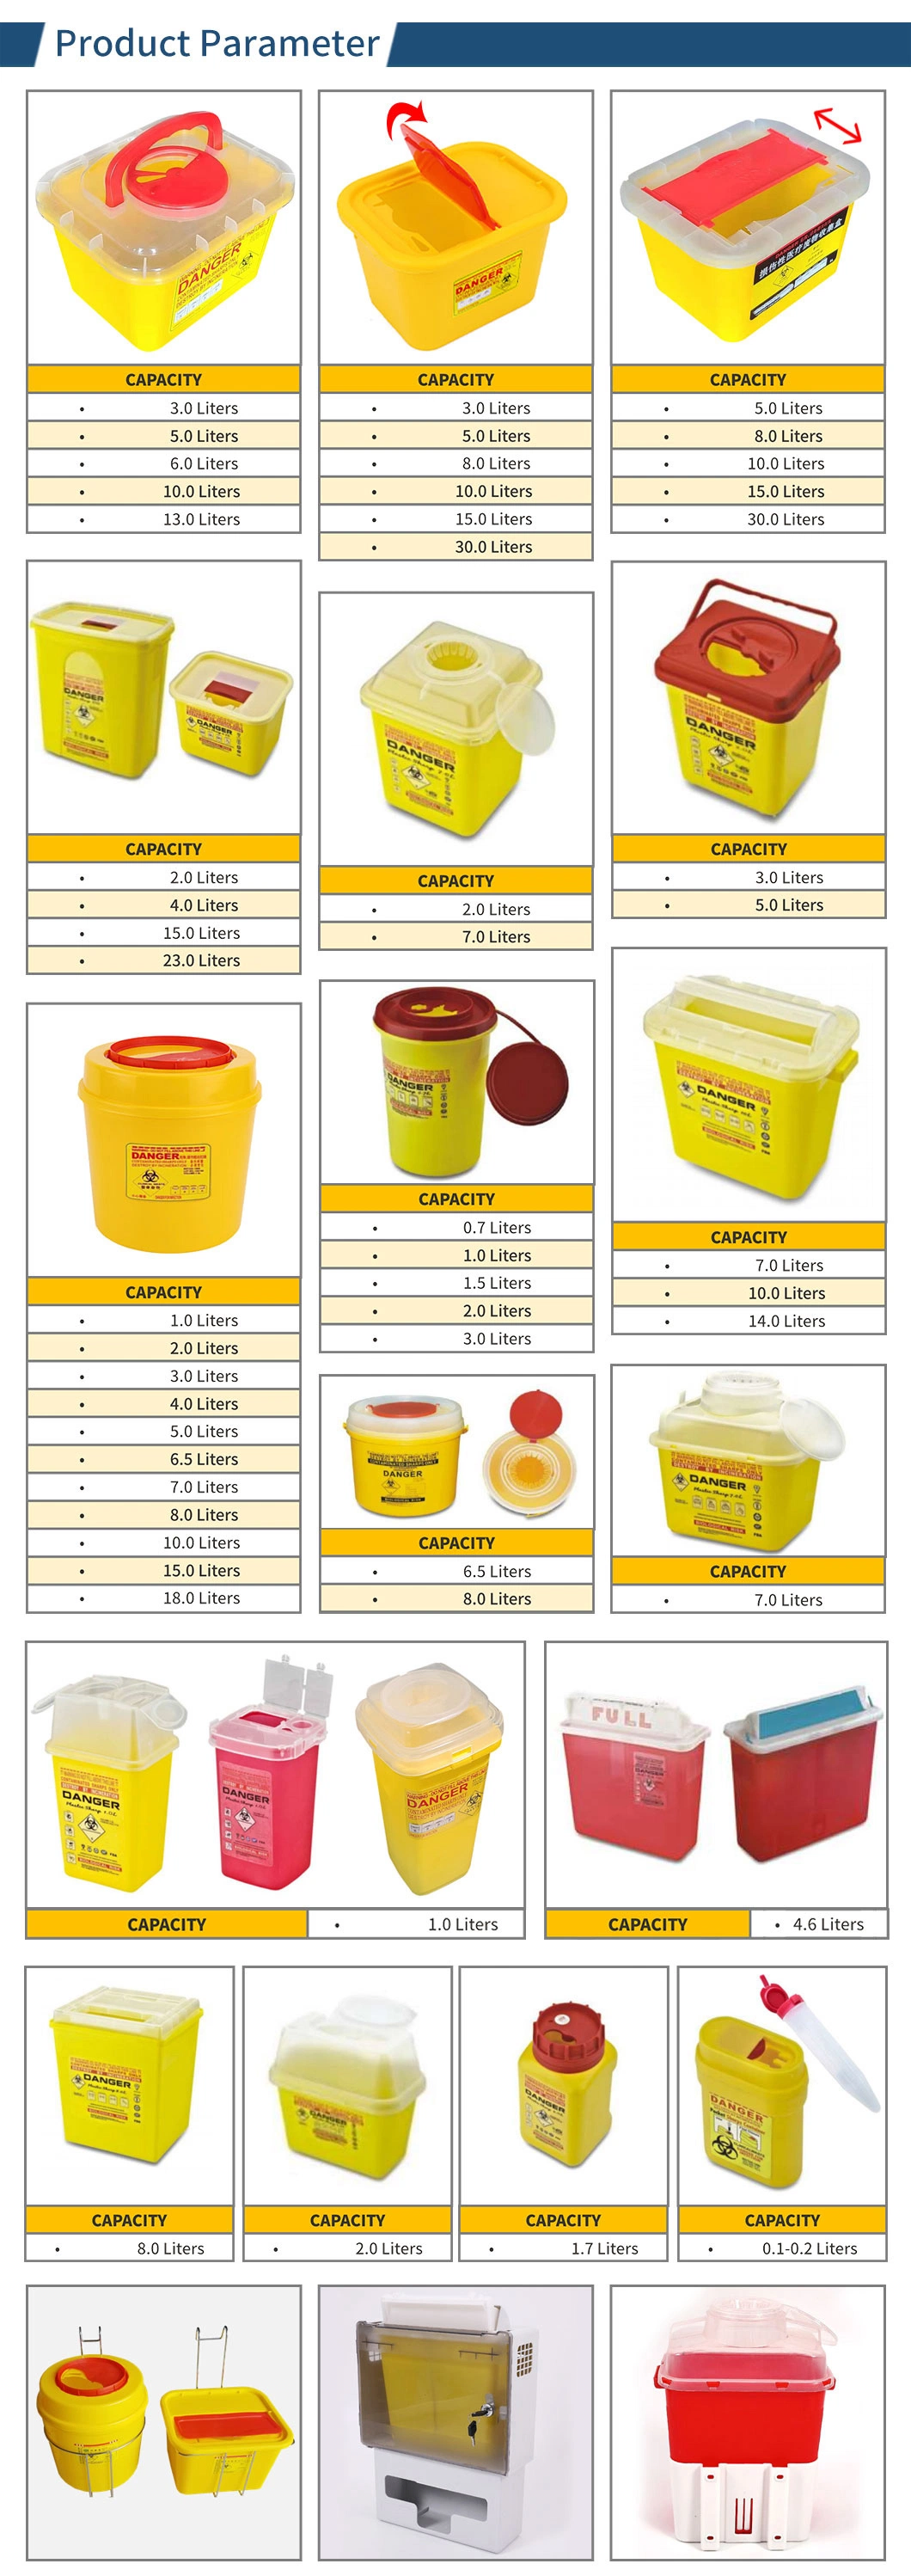 1L/3L/4L/5L/6L/8L/10L/15 Liter Yellow Red Waterproof Safety Plastic Disposable Needle Waste Biohazard Hospital Round/Squre Medical Sharp Container with Lid